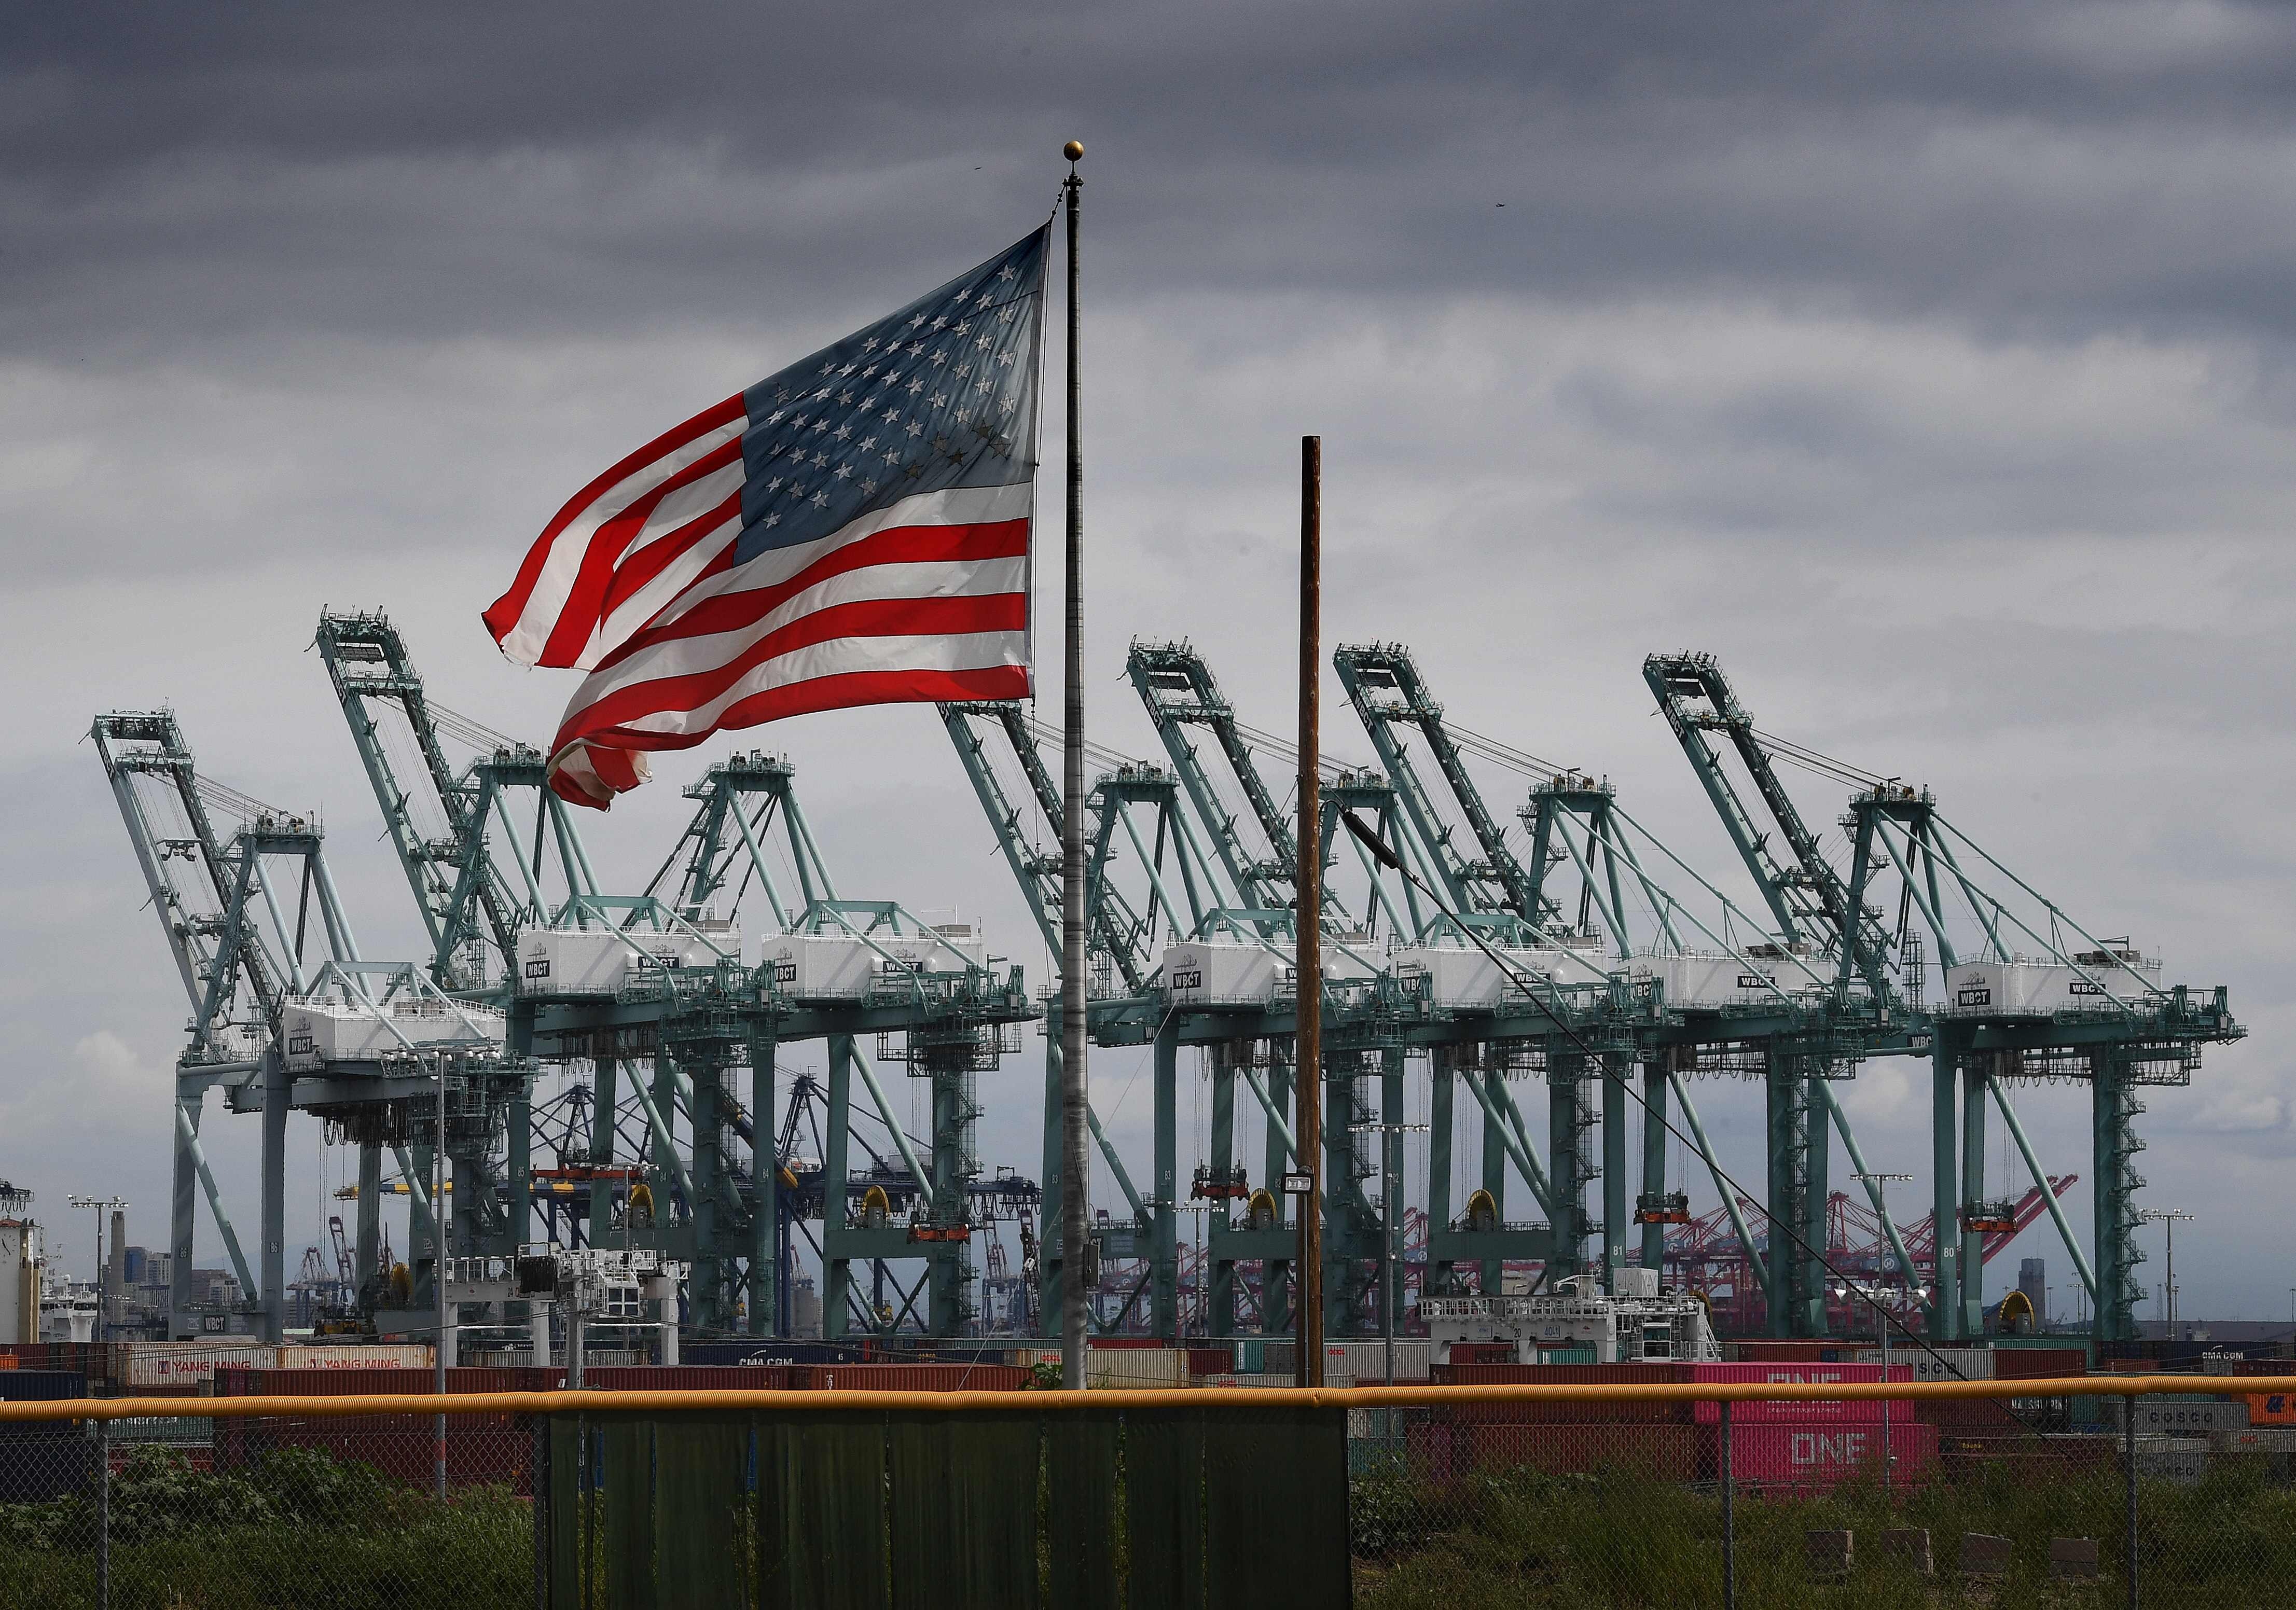 The US flag flies over shipping cranes and containers in Long Beach, California, on March 4, 2019. Photo: AFP